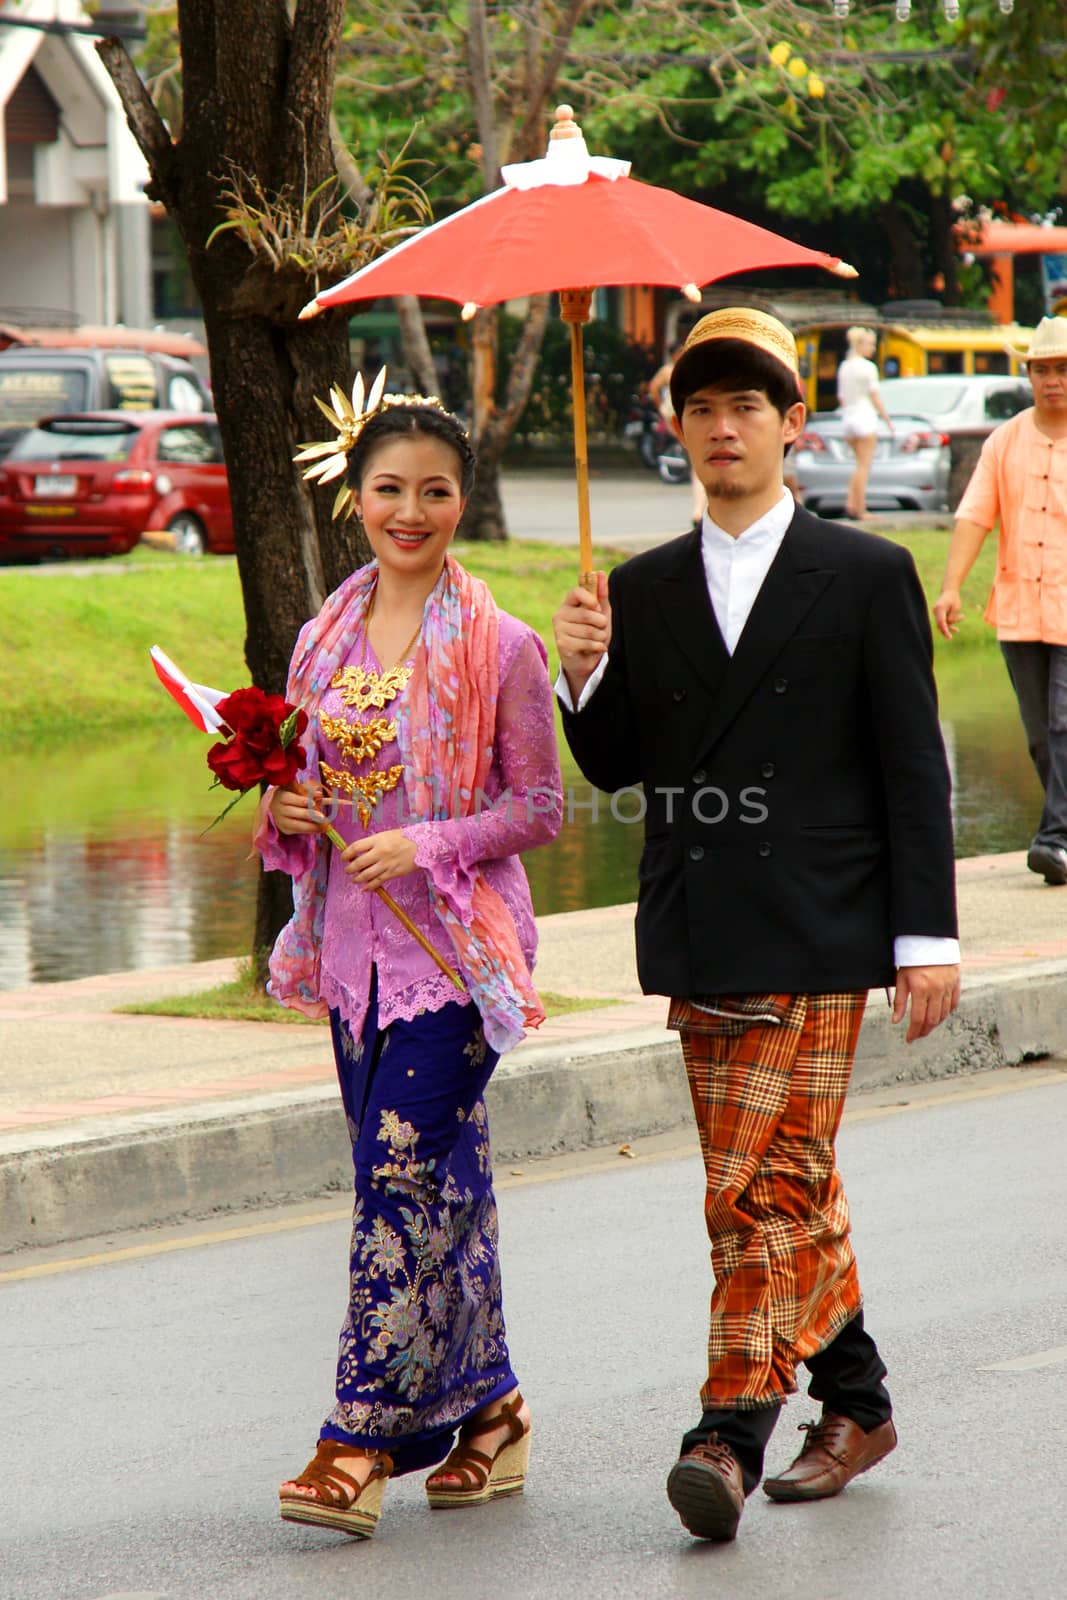 CHIANGMAI, THAILAND - FEBRUARY 2-2013 : Unidentified Thai people on the parade in ChiangMai Flower Festival 2013 at ChiangMai, Thailand.